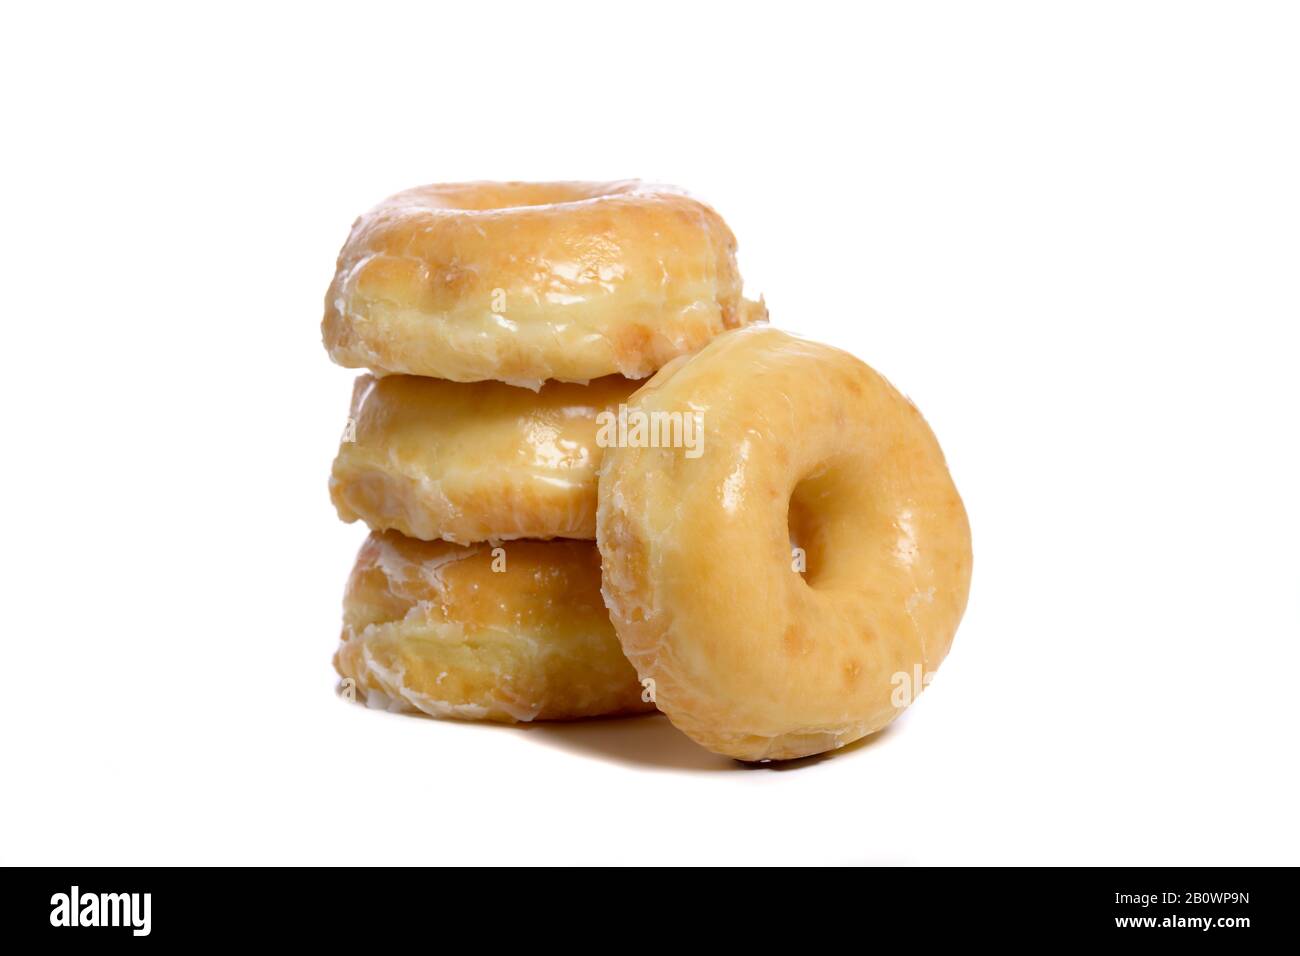 Several glazed donuts on a white background Stock Photo